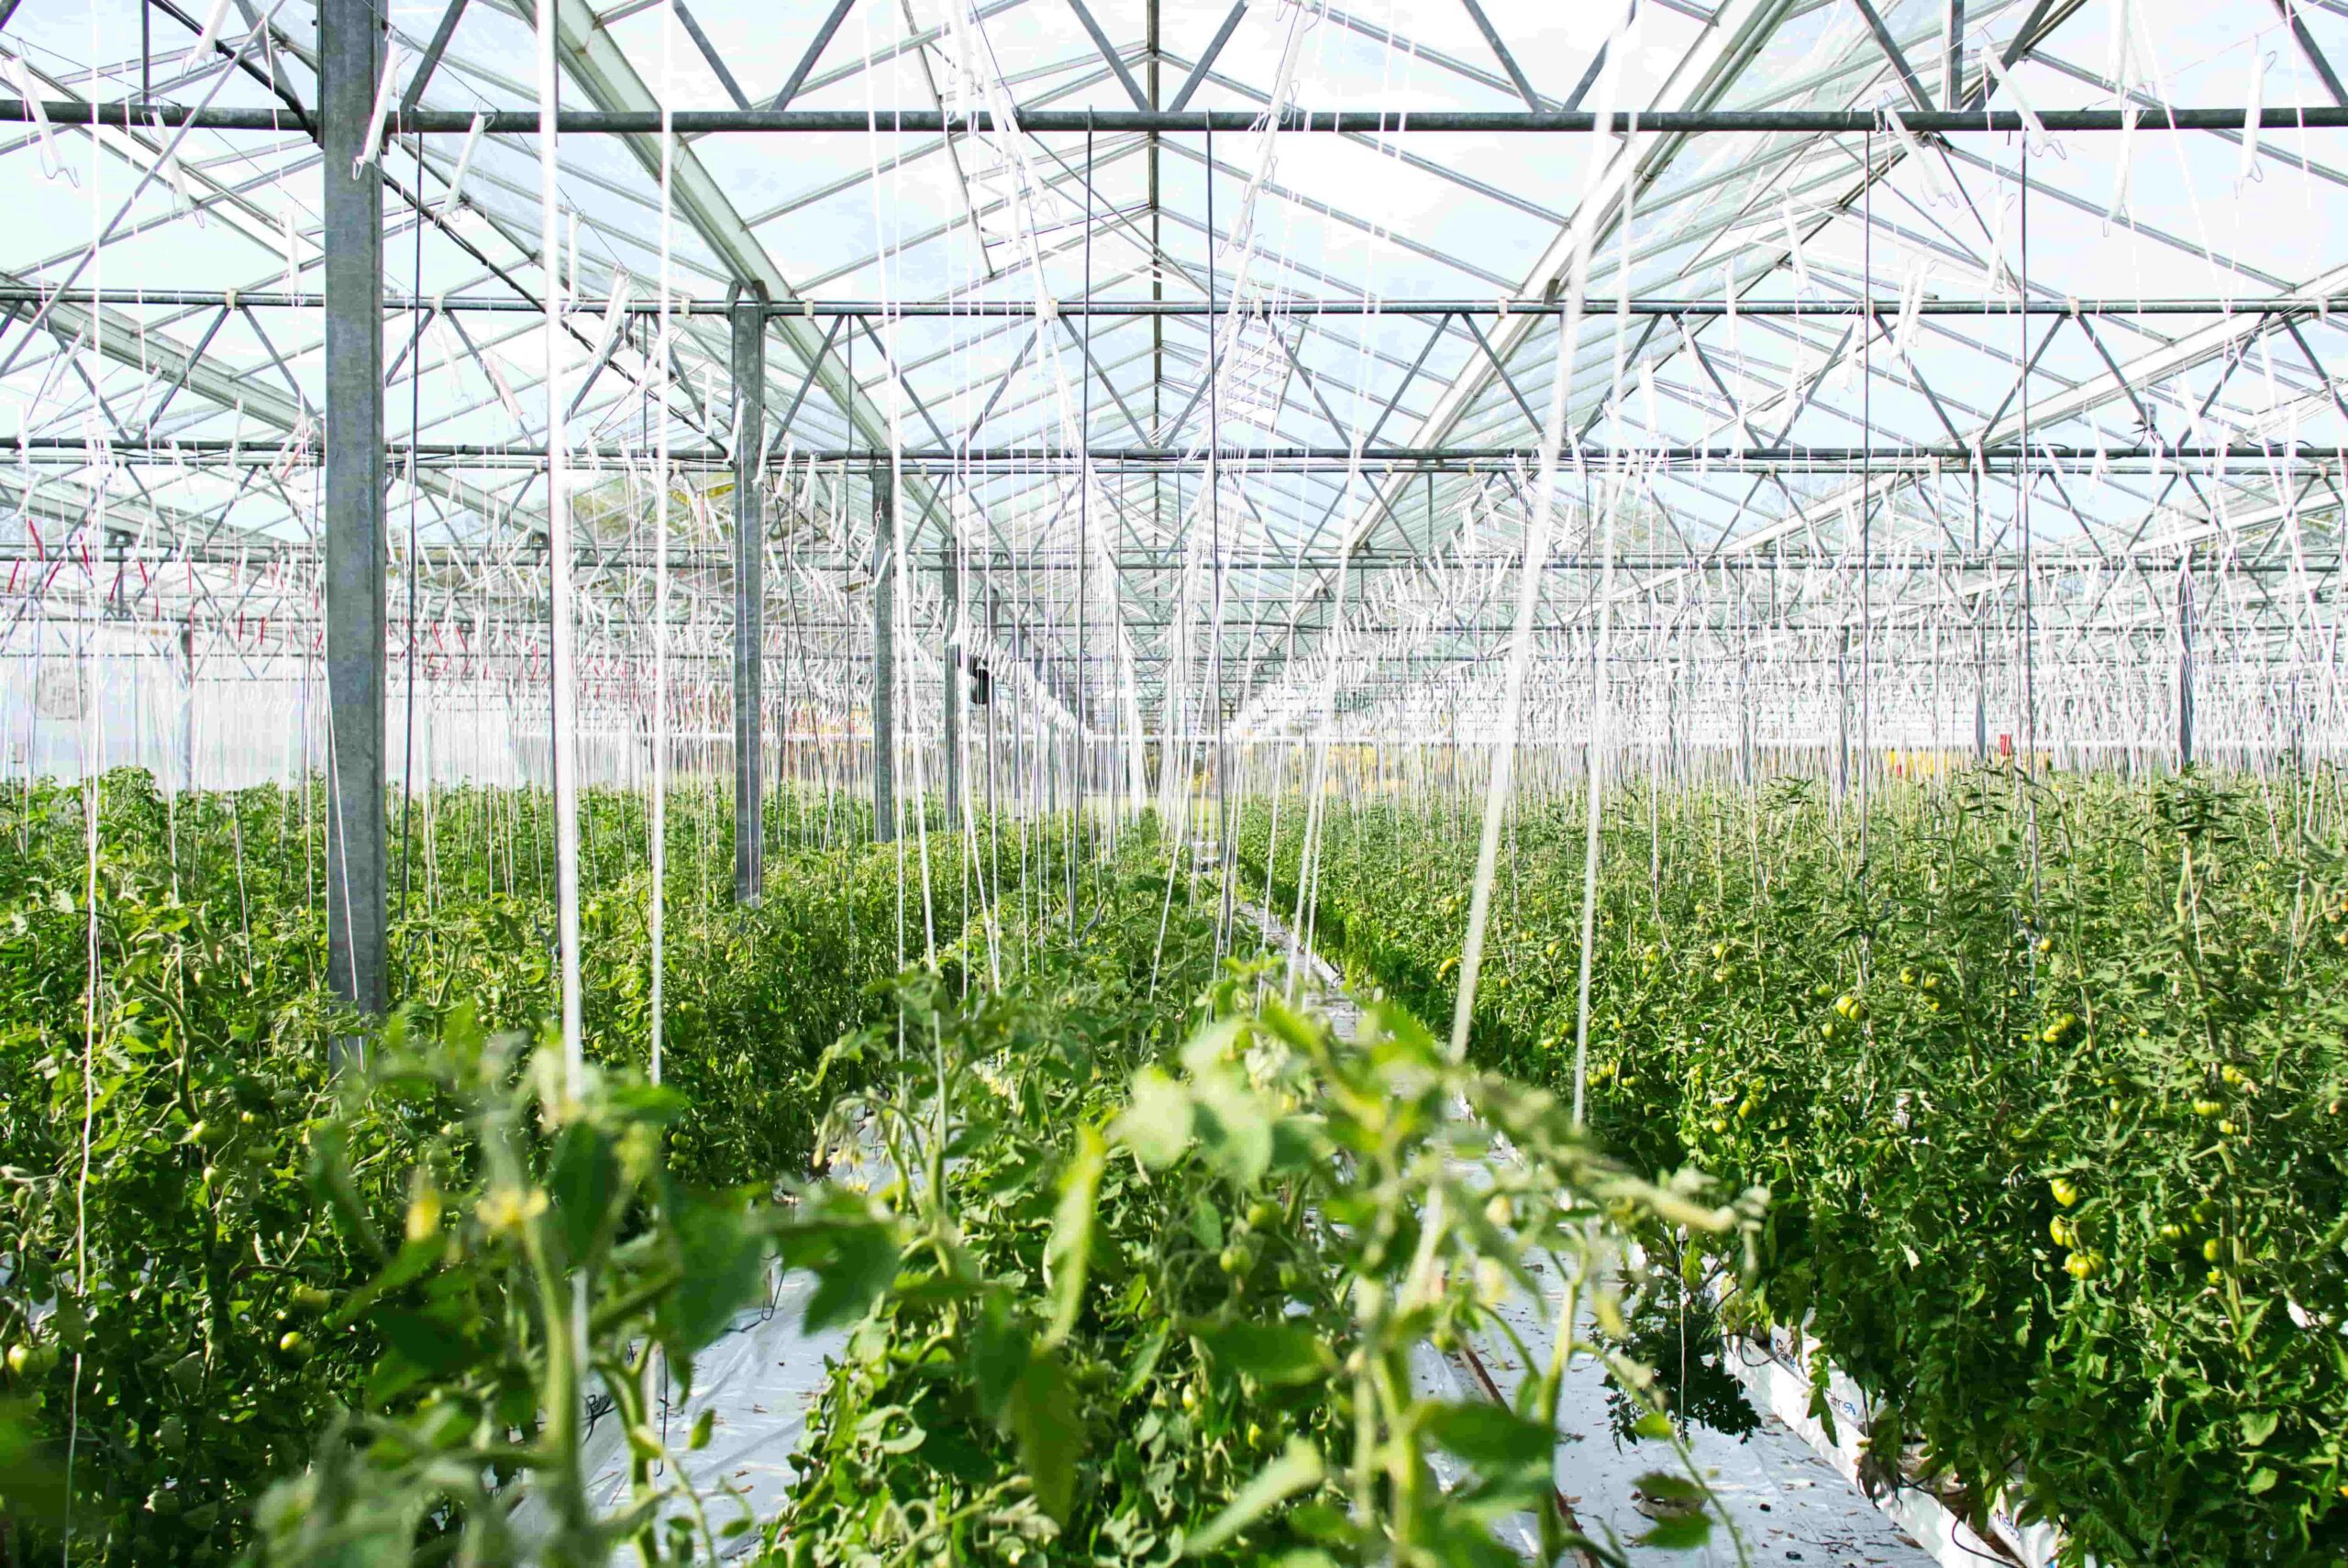 Agricultural greenhouse representing the greenhouse farming industry